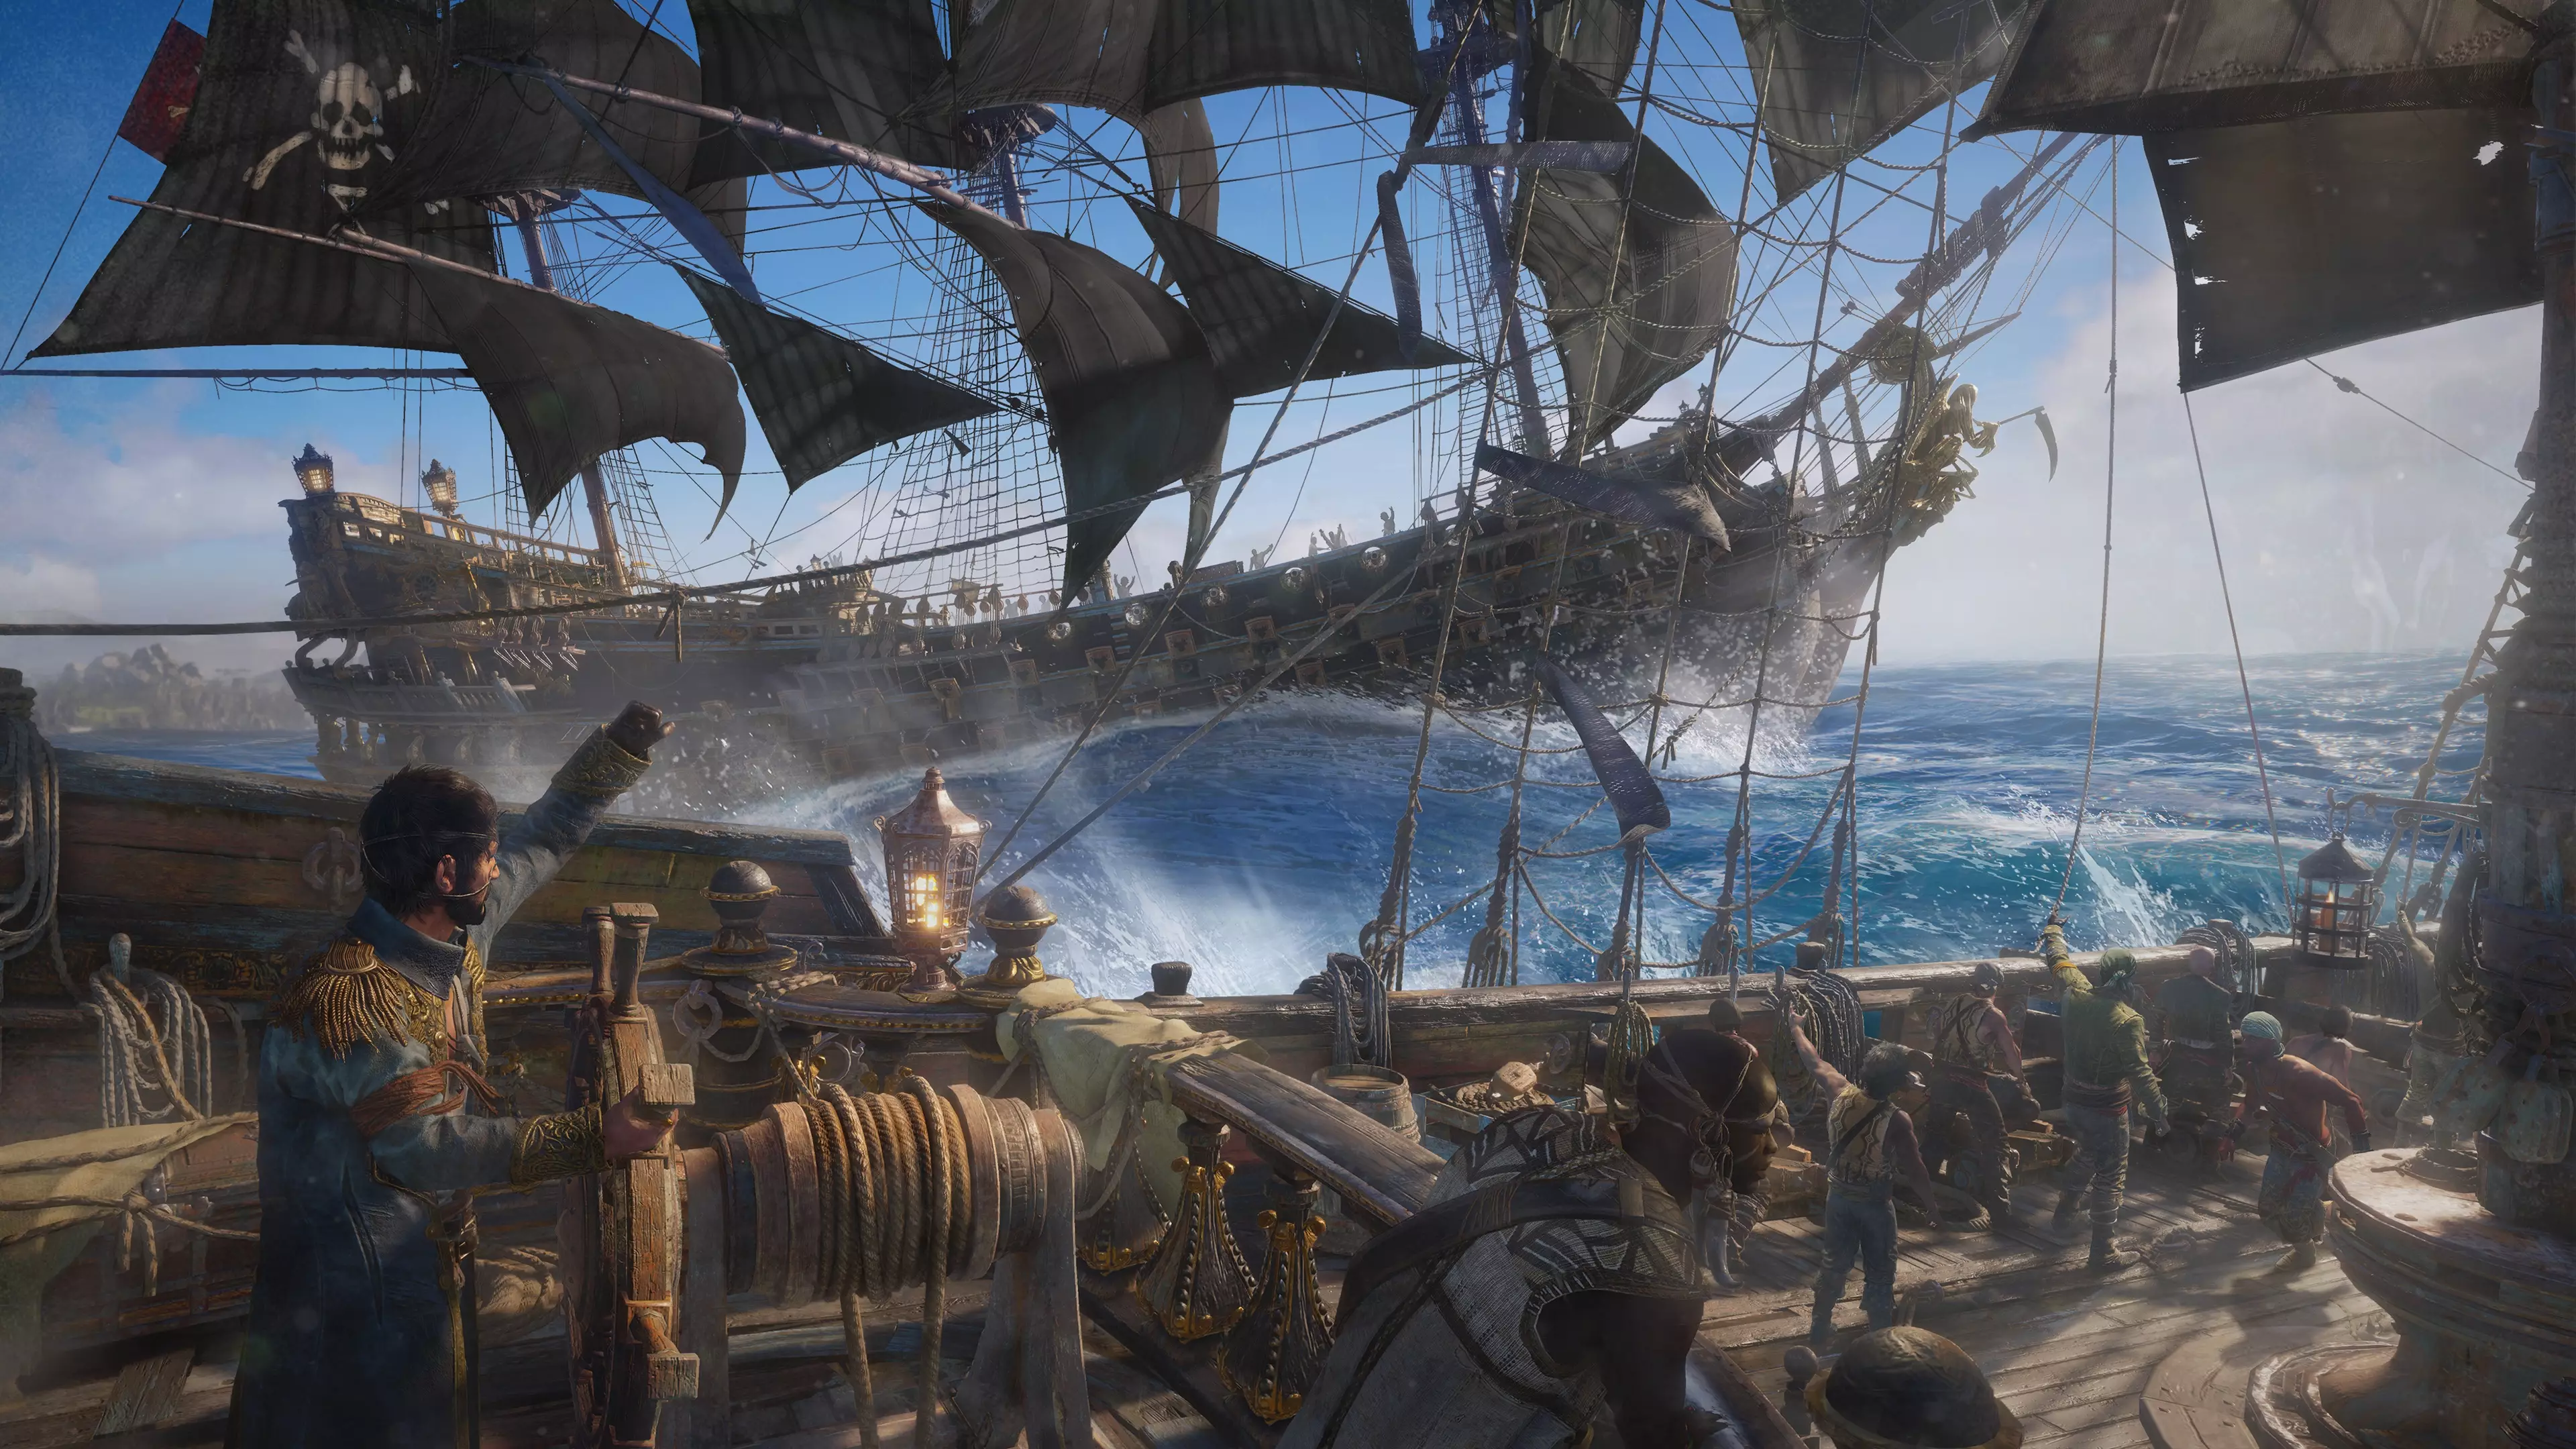 The ship v ship combat is lifted straight from Assassin's Creed